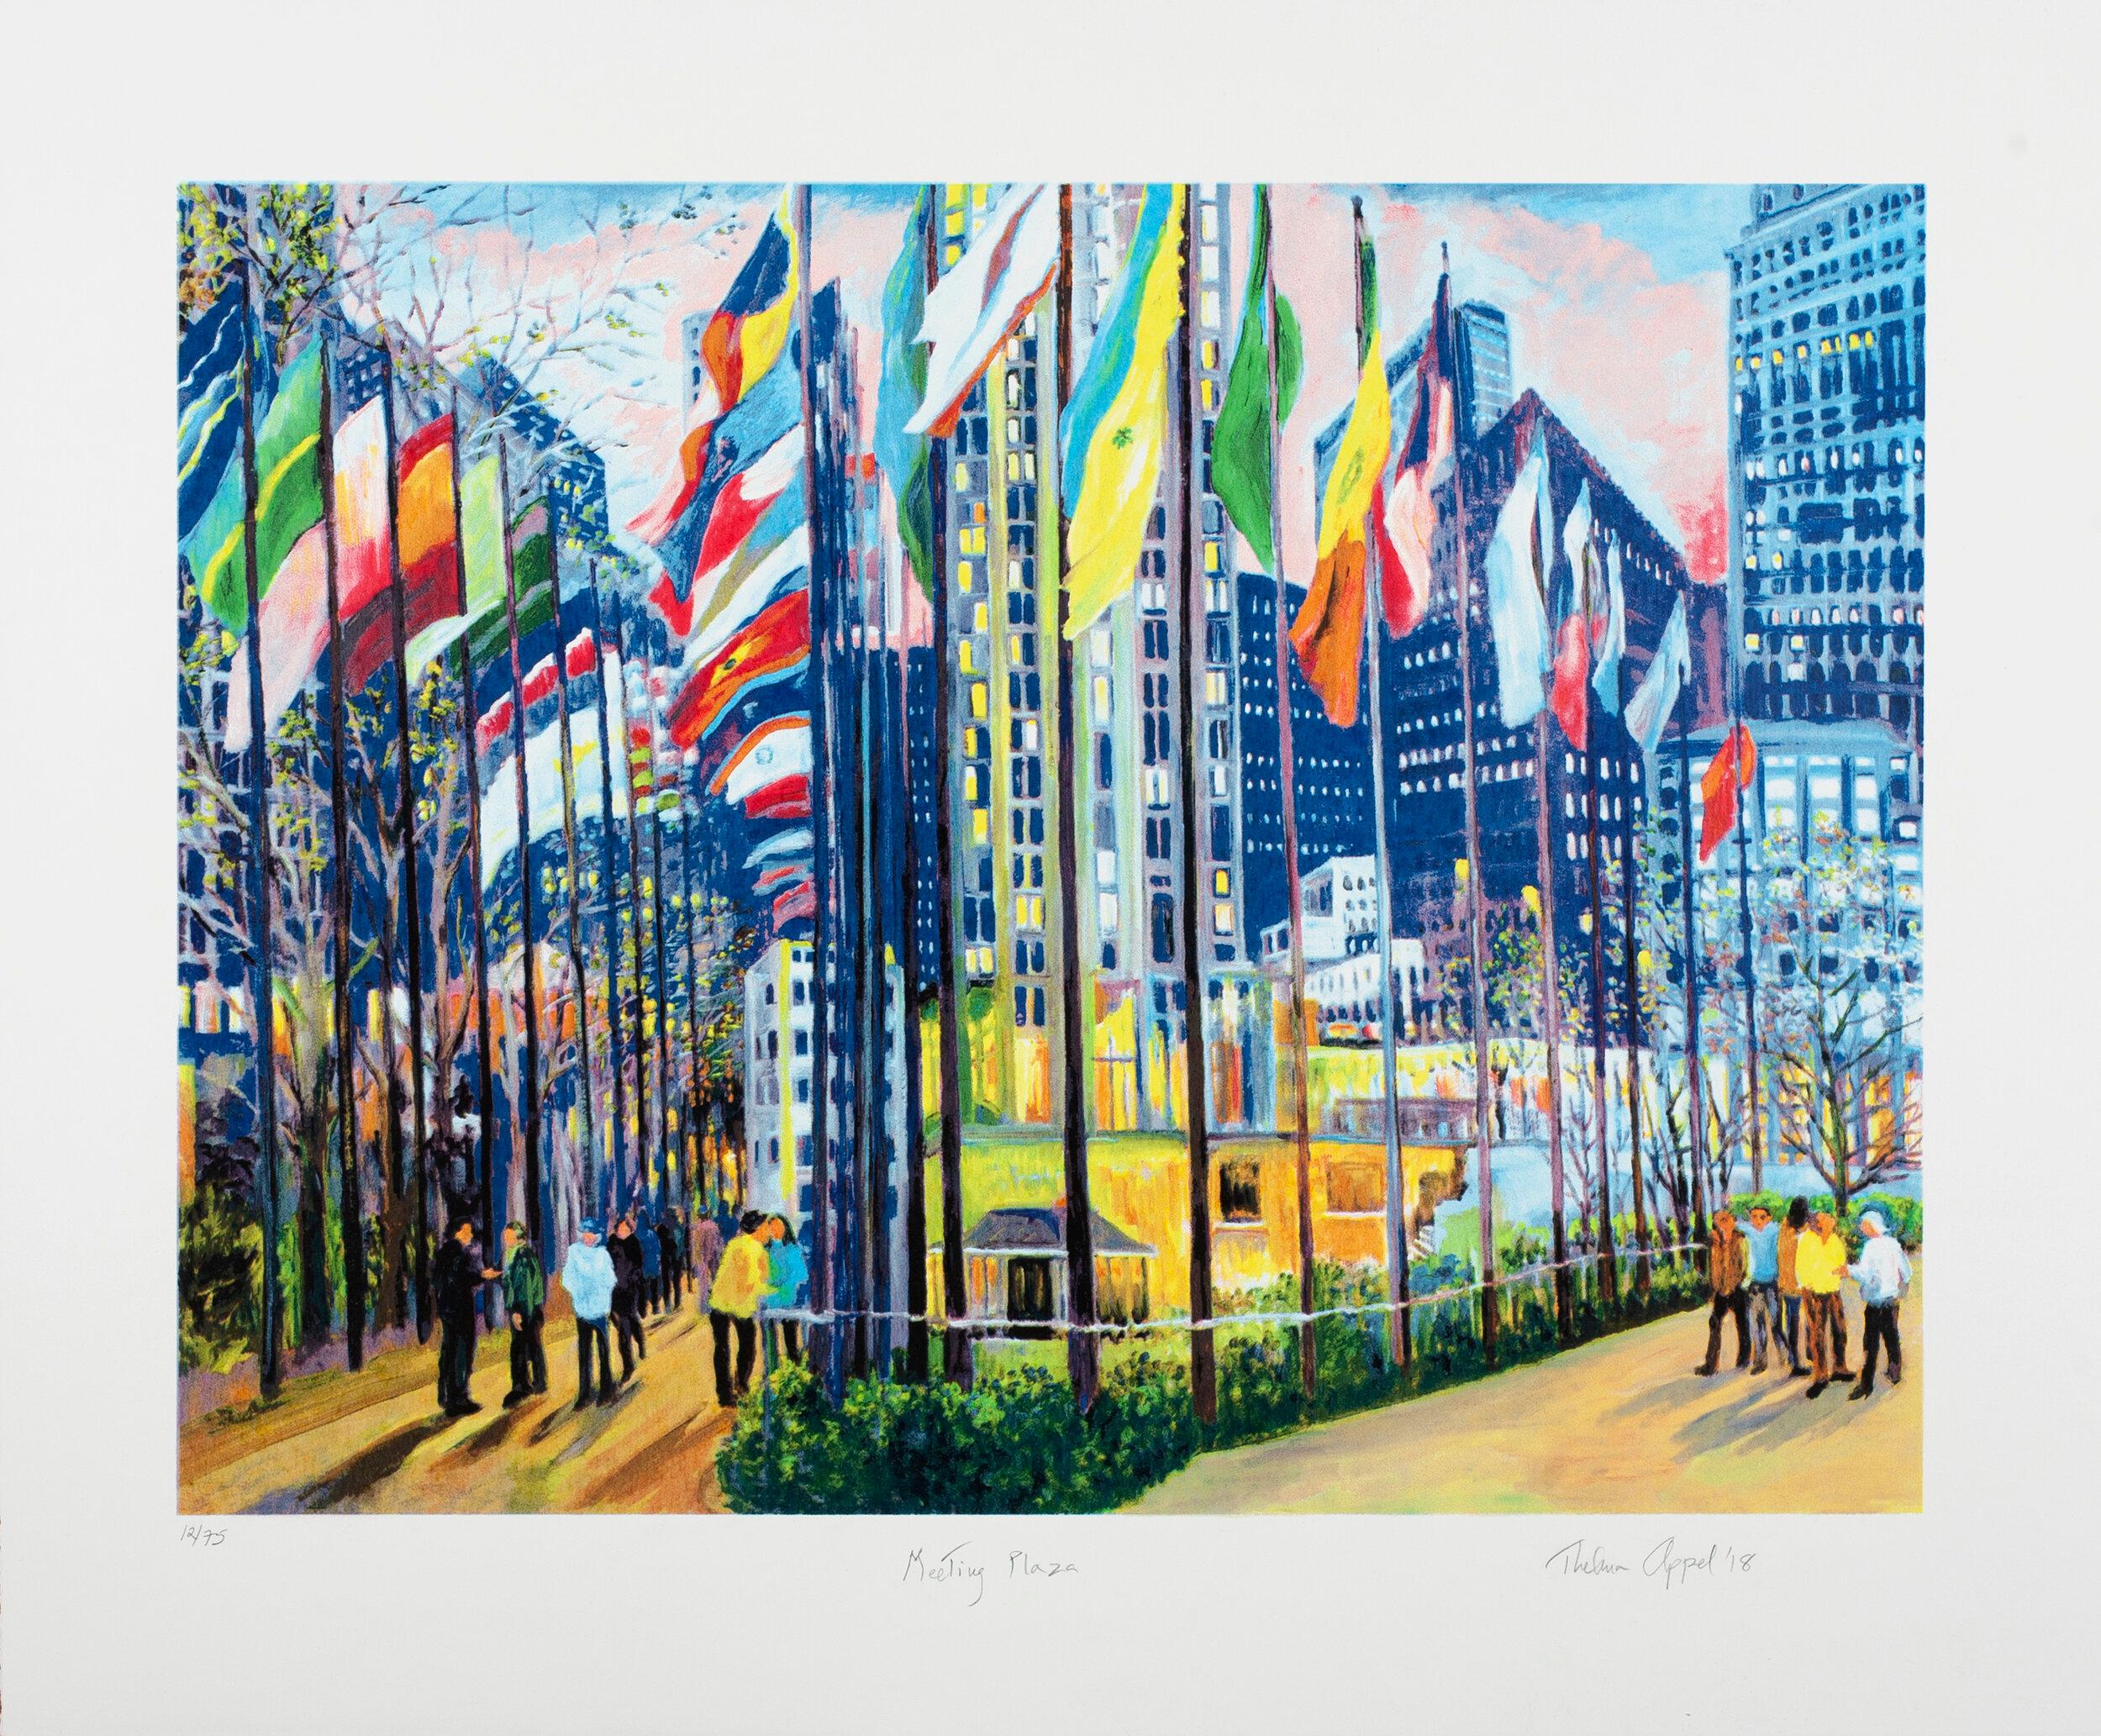 Thelma Appel Abstract Print - Meeting Plaza, Signed/N 25-color silkscreen, Rockefeller Ctr NY & United Nations